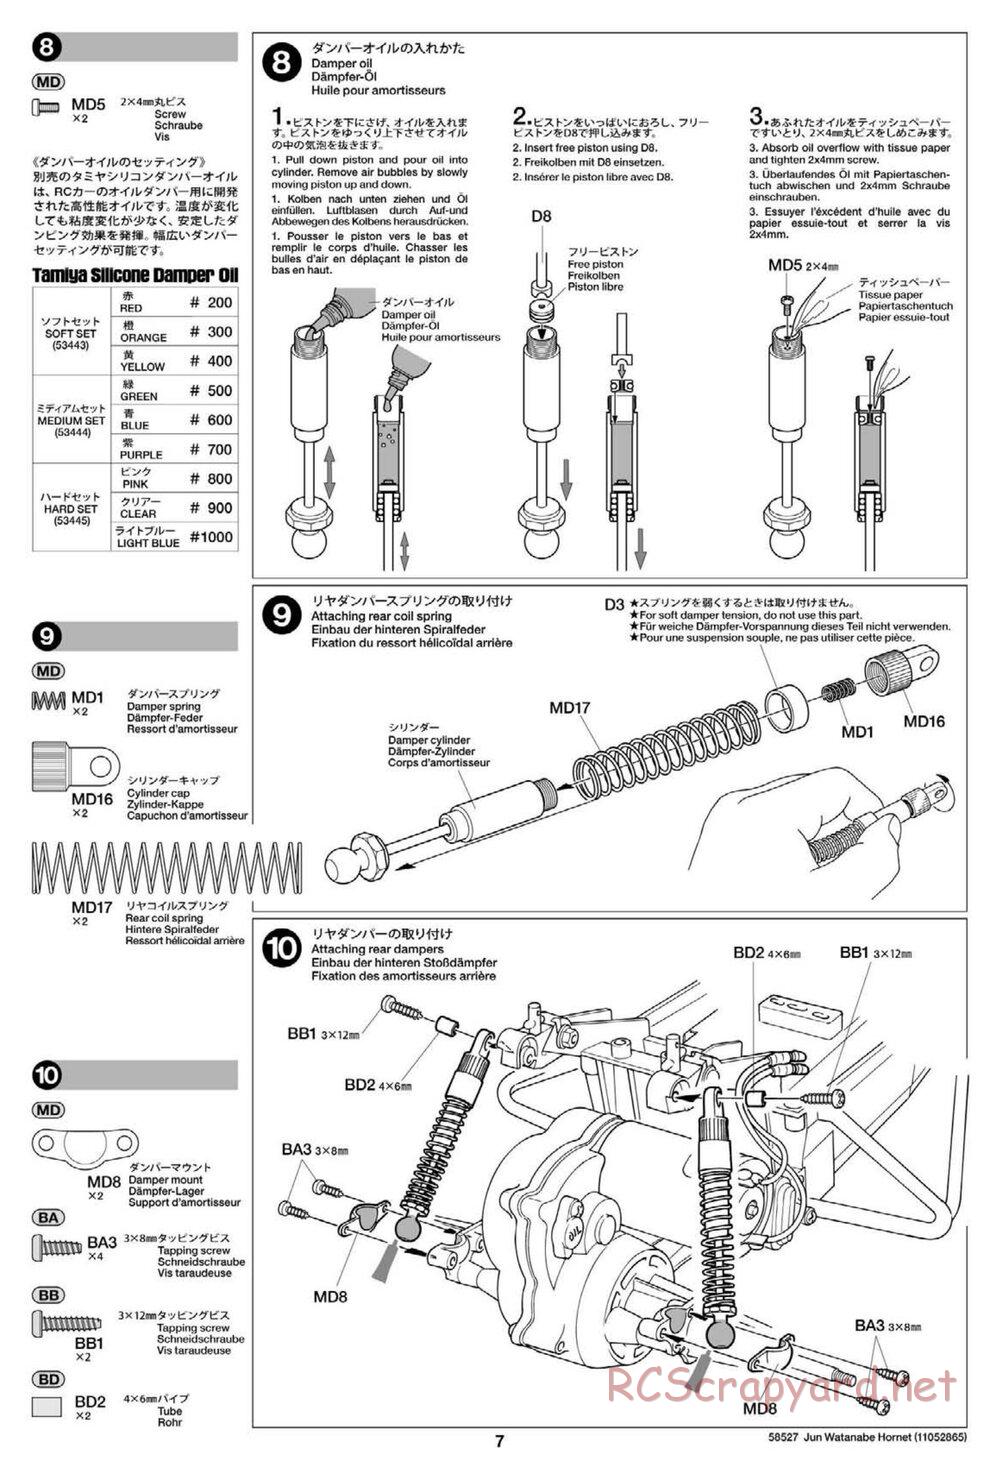 Tamiya - The Hornet by Jun Watanabe - GH Chassis - Manual - Page 7